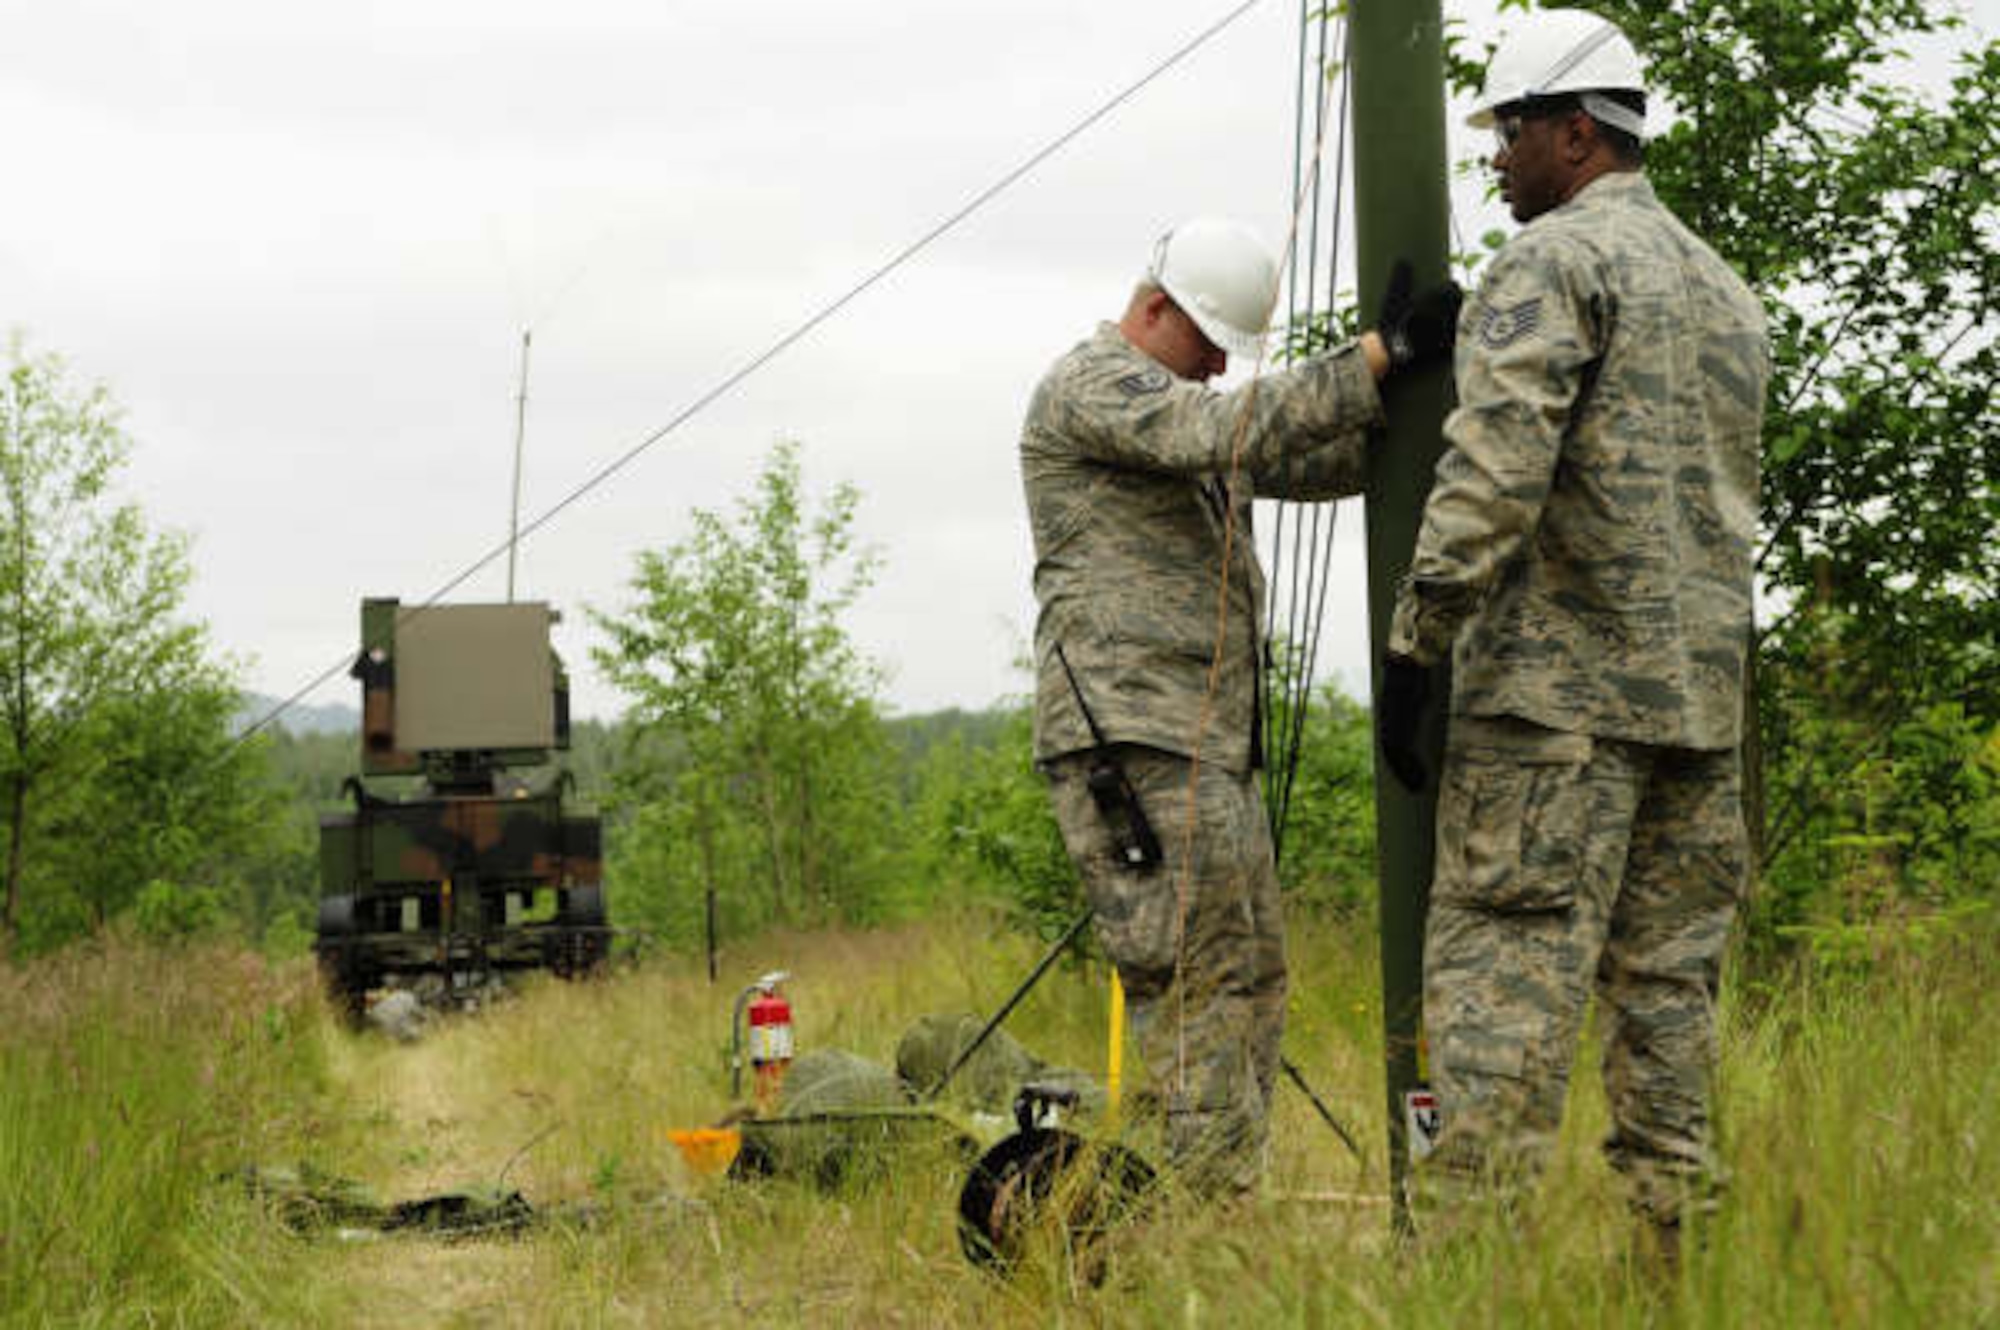 U. S. Air Force Staff Sgt. Anthony Johnson, Electronic Computer Systems Technician, and Staff Sgt. Ray Ouellette, Ground Radio Technician, set up an RF Module during Exercise Amalgam Dart, near Camp Rilea OR, June 14, 2009. (U.S. Air Force photo by Technical Sgt. Sean M. Worrell)